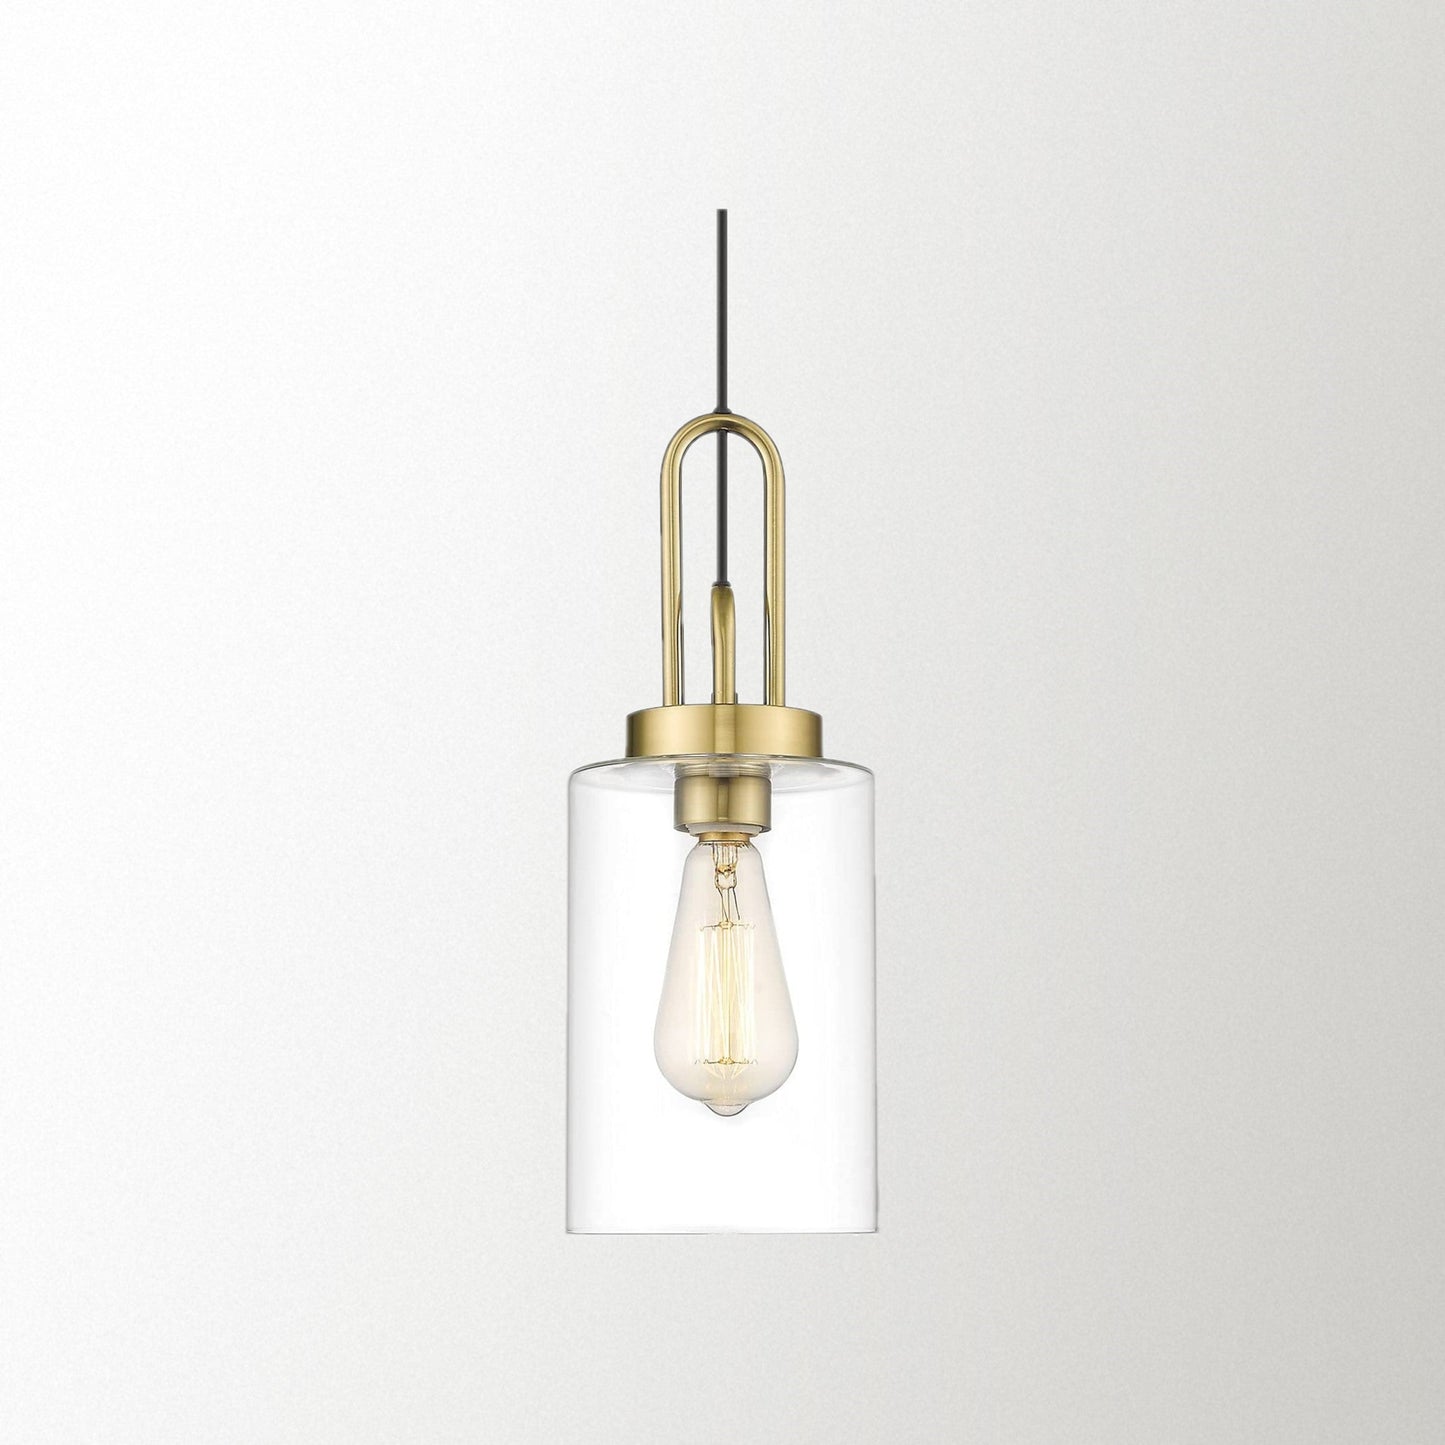 
                  
                    Emliviar Modern Gold Pendant Light - Kitchen Island Hanging Light with Clear Glass Shade in Gold Finish,YCE236 M1L BG
                  
                